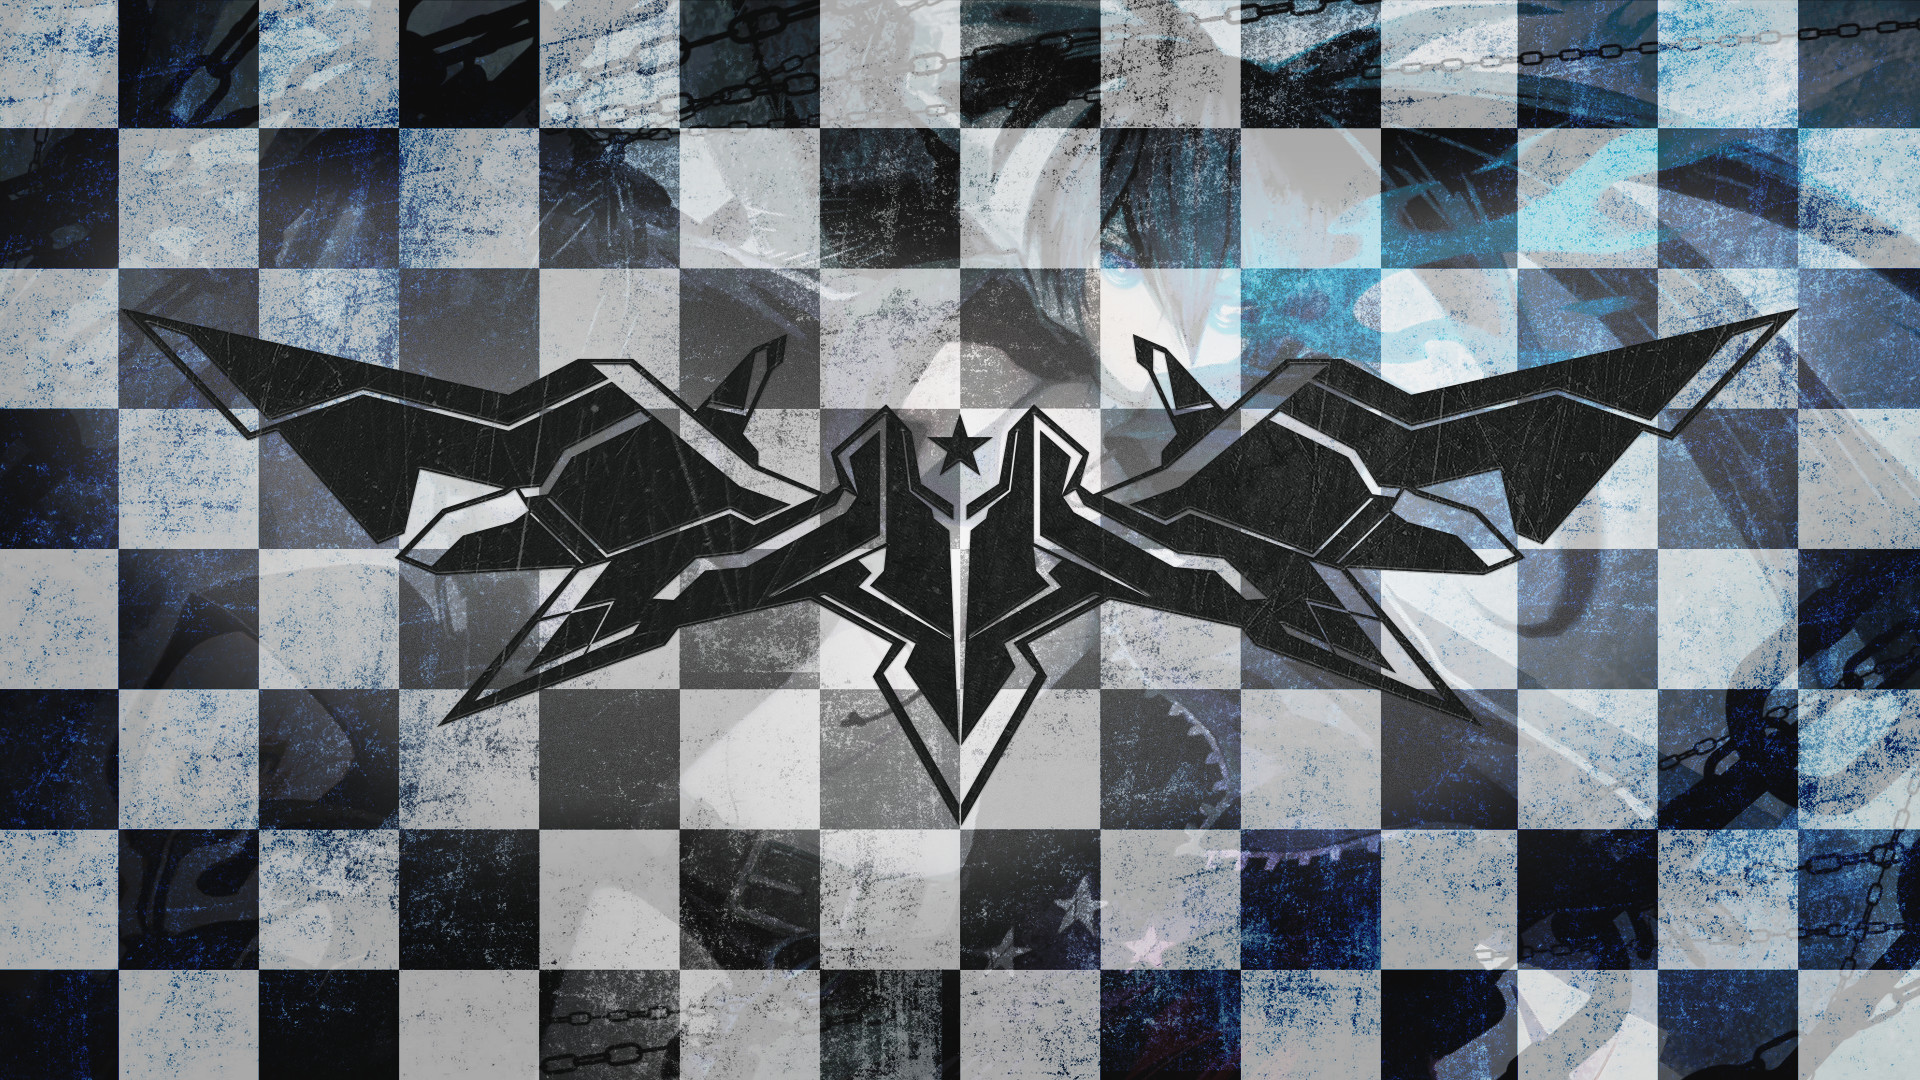 1920x1080 ... Black Rock Shooter - The Game Logo Wallpaper by M4he